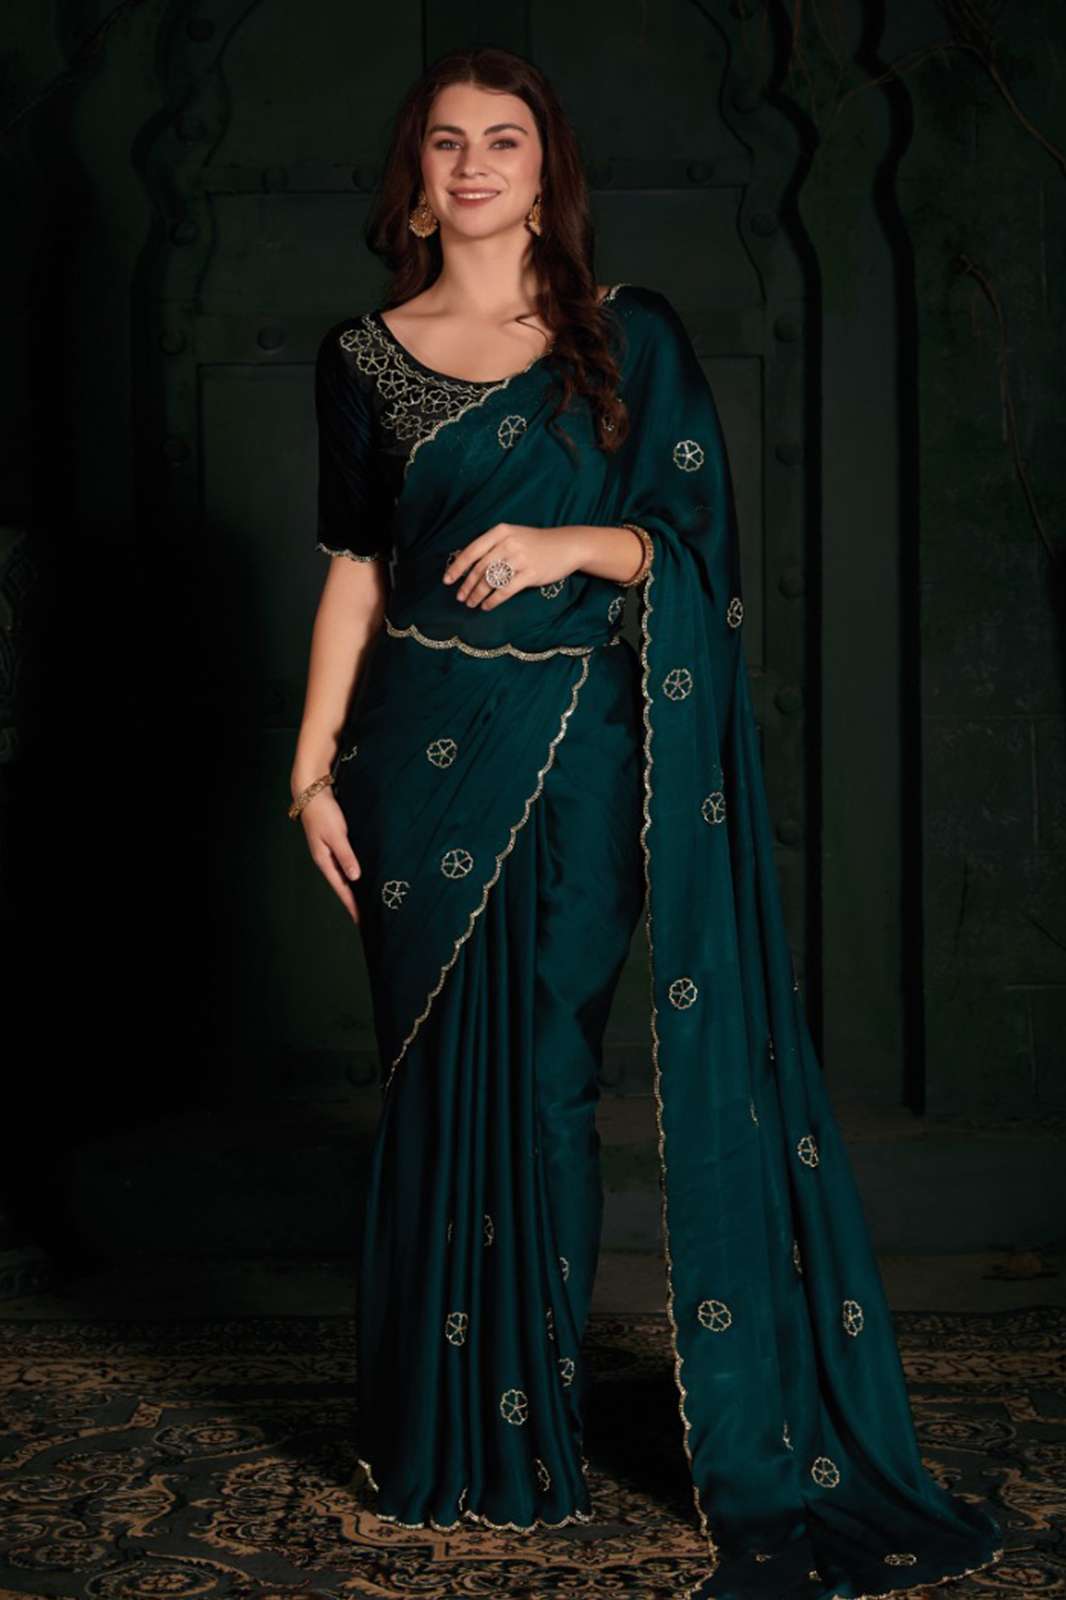 MEHEK 5533 731A TO 731F Pure Satin Georgette Blooming Fabric with Zircon Butti Scattered all over the Sarees With Belt